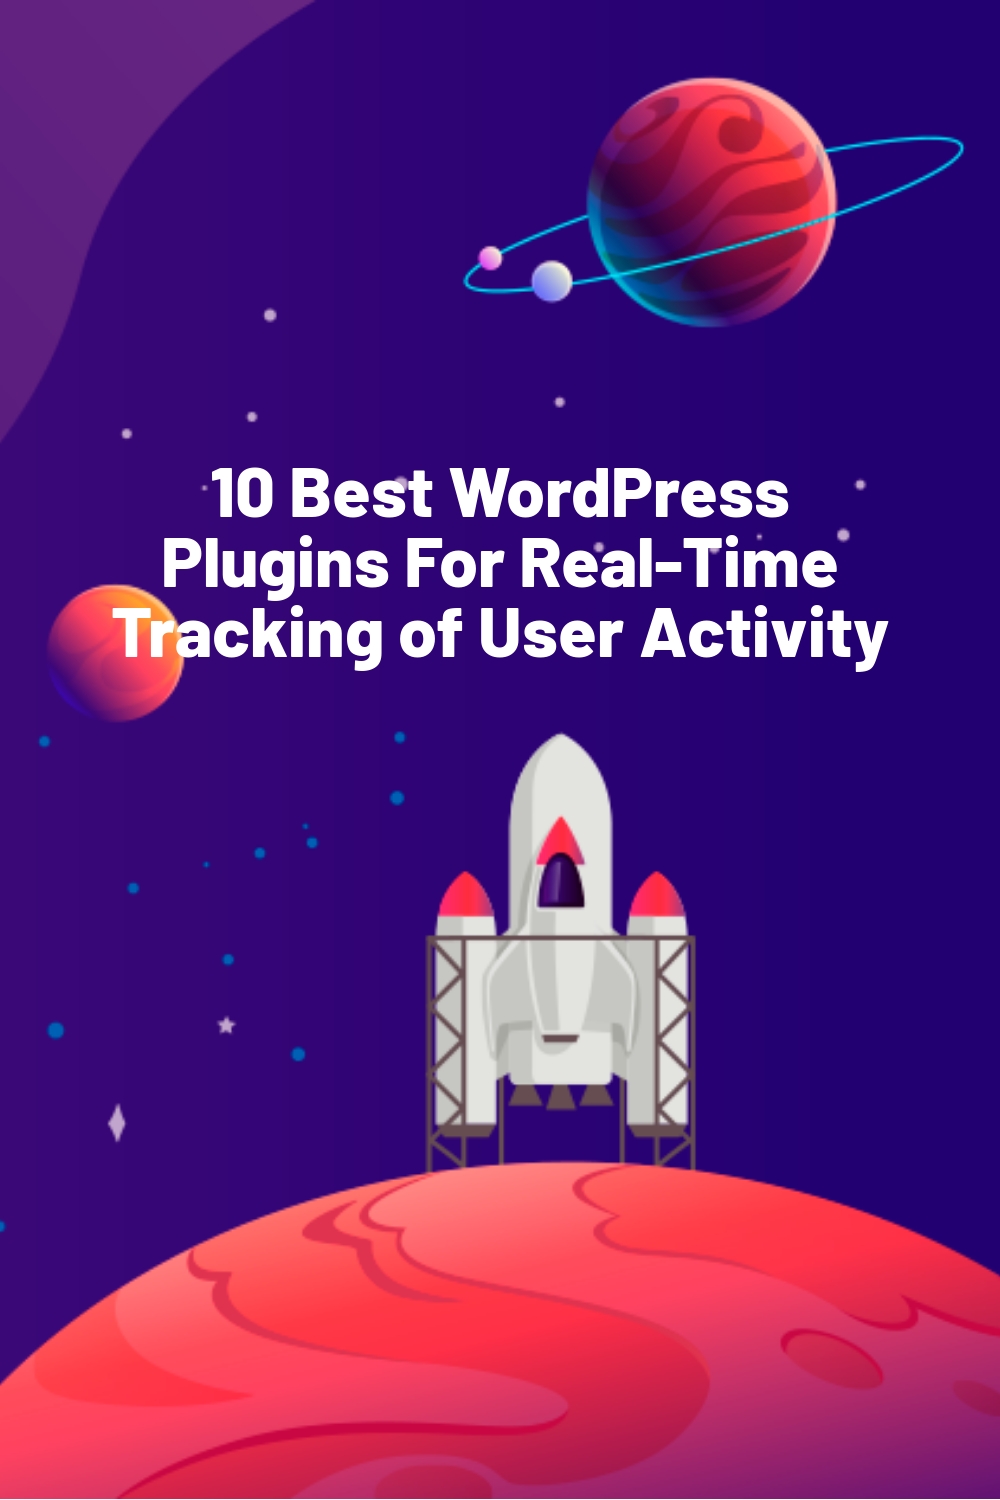 10 Best WordPress Plugins For Real-Time Tracking of User Activity